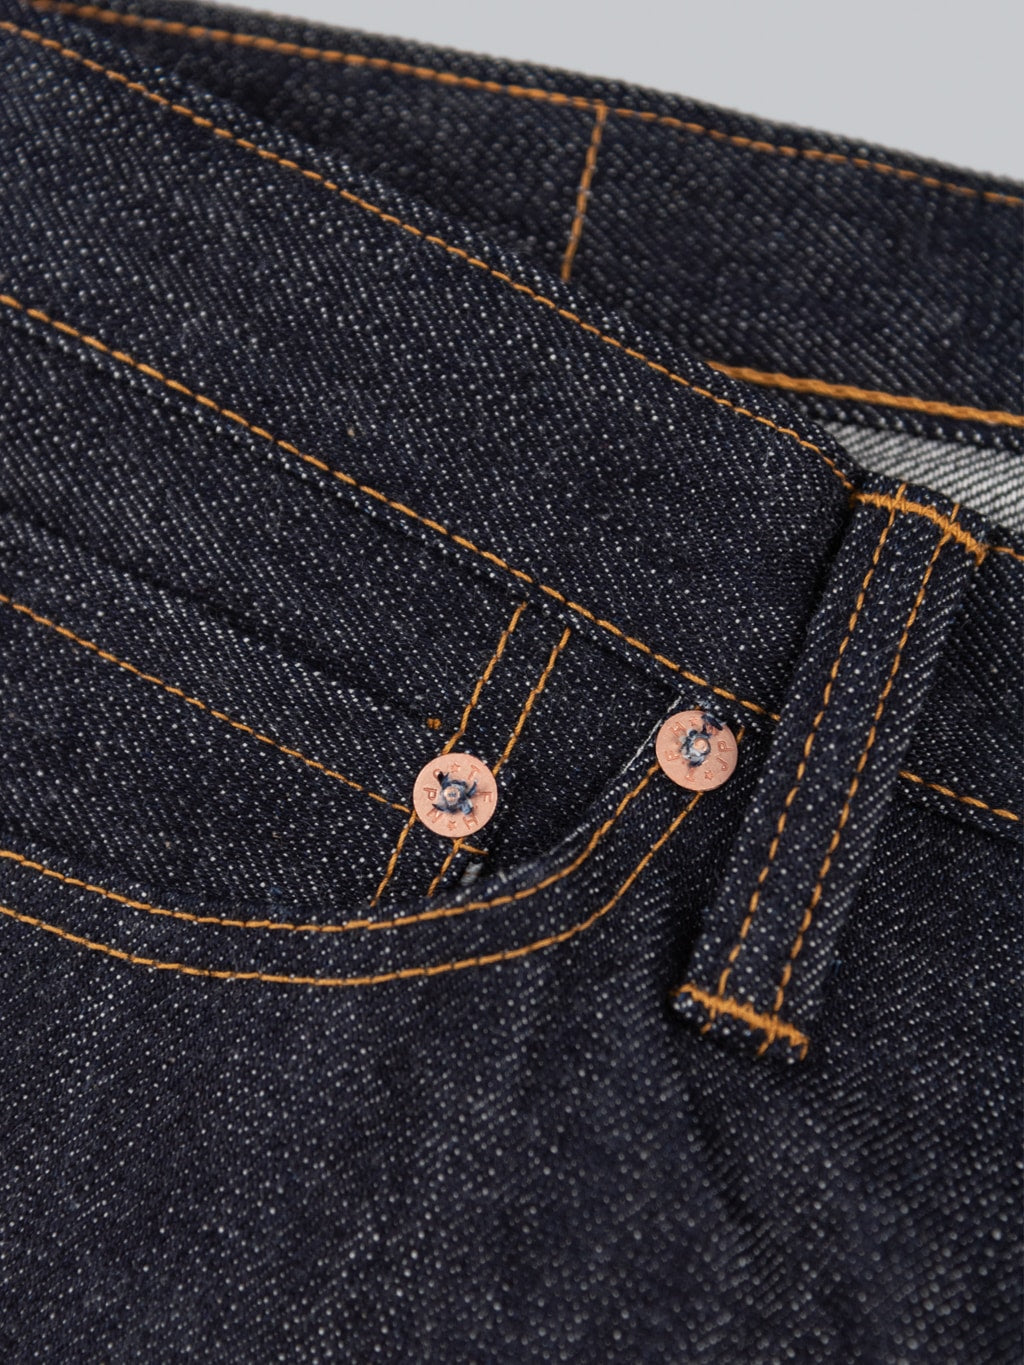 The Flat Head 3009 14.5oz straight tapered Jeans cooper rivets